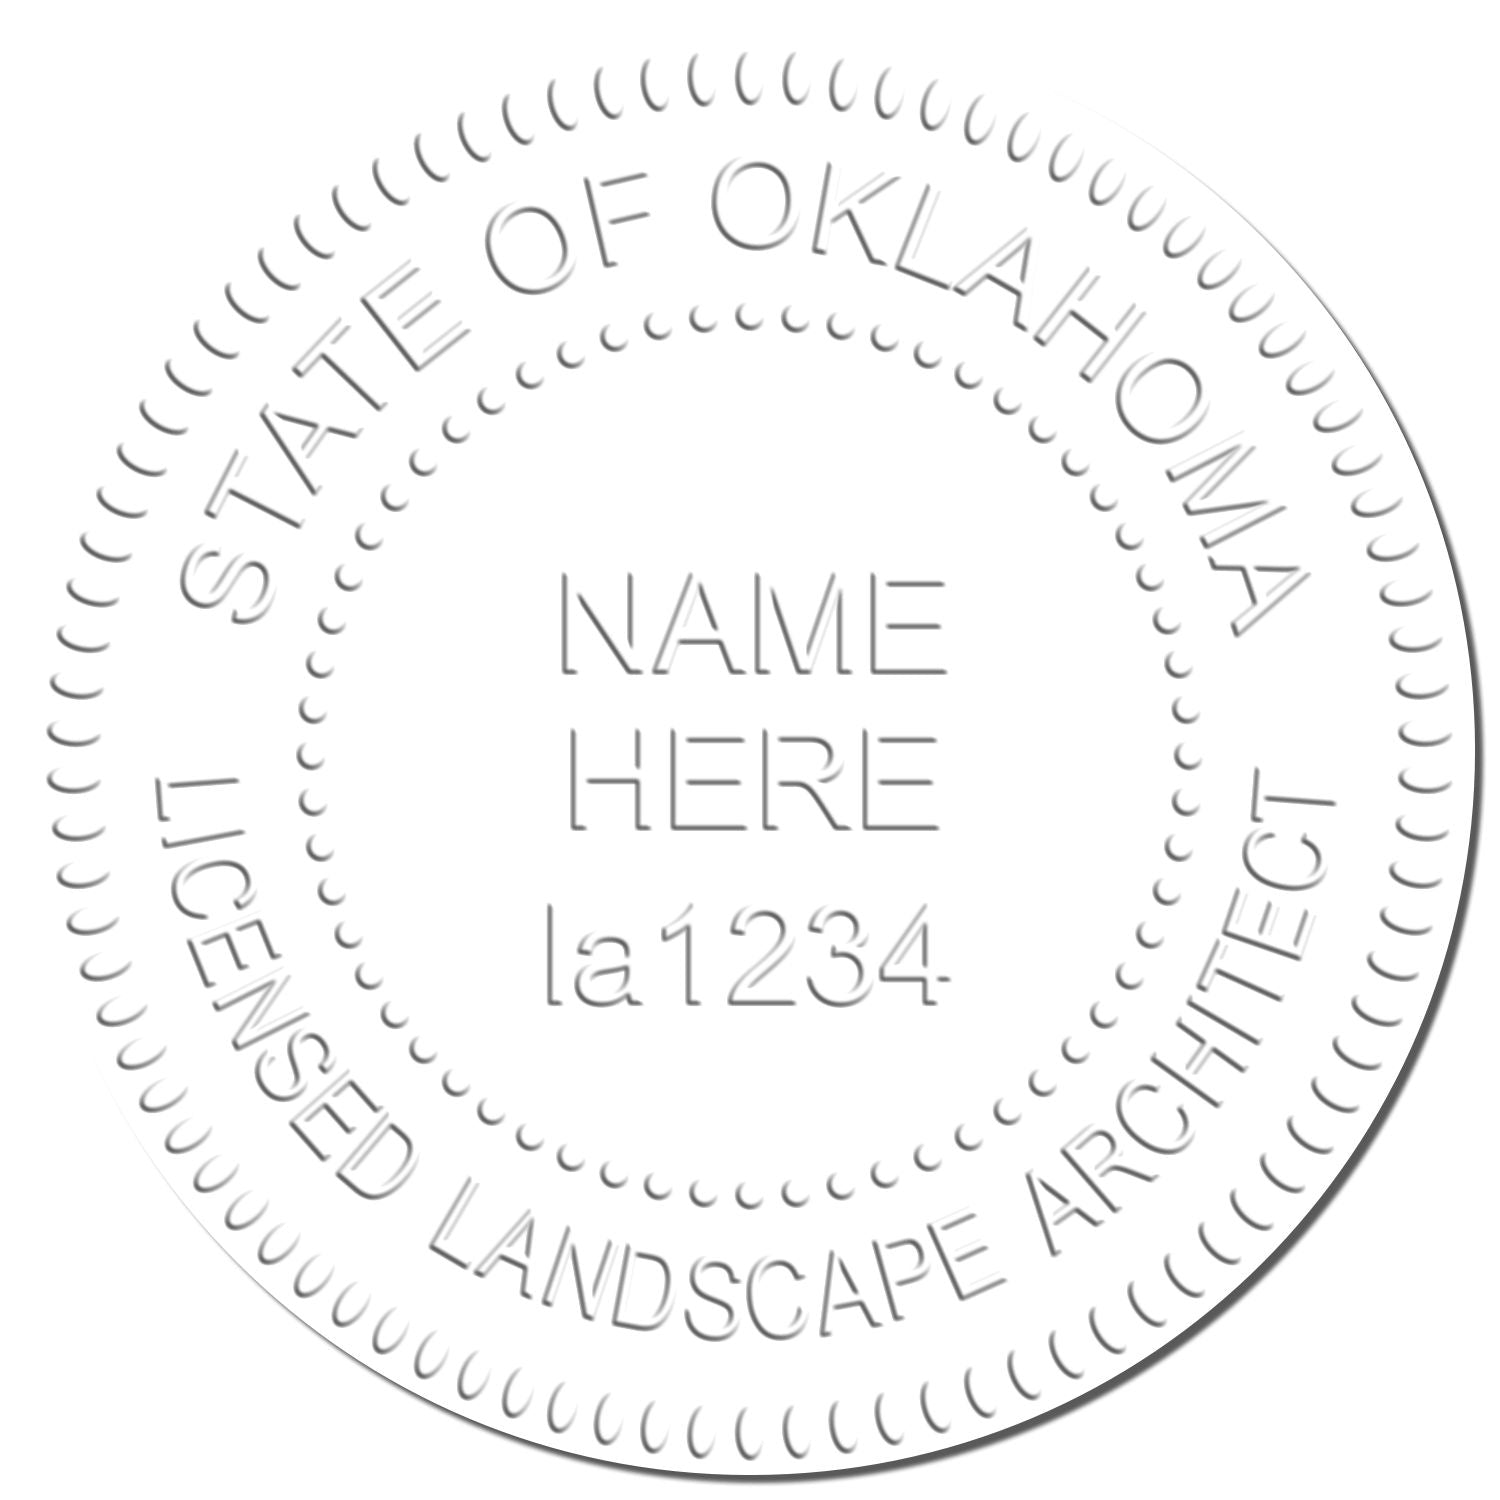 This paper is stamped with a sample imprint of the Oklahoma Long Reach Landscape Architect Embossing Stamp, signifying its quality and reliability.